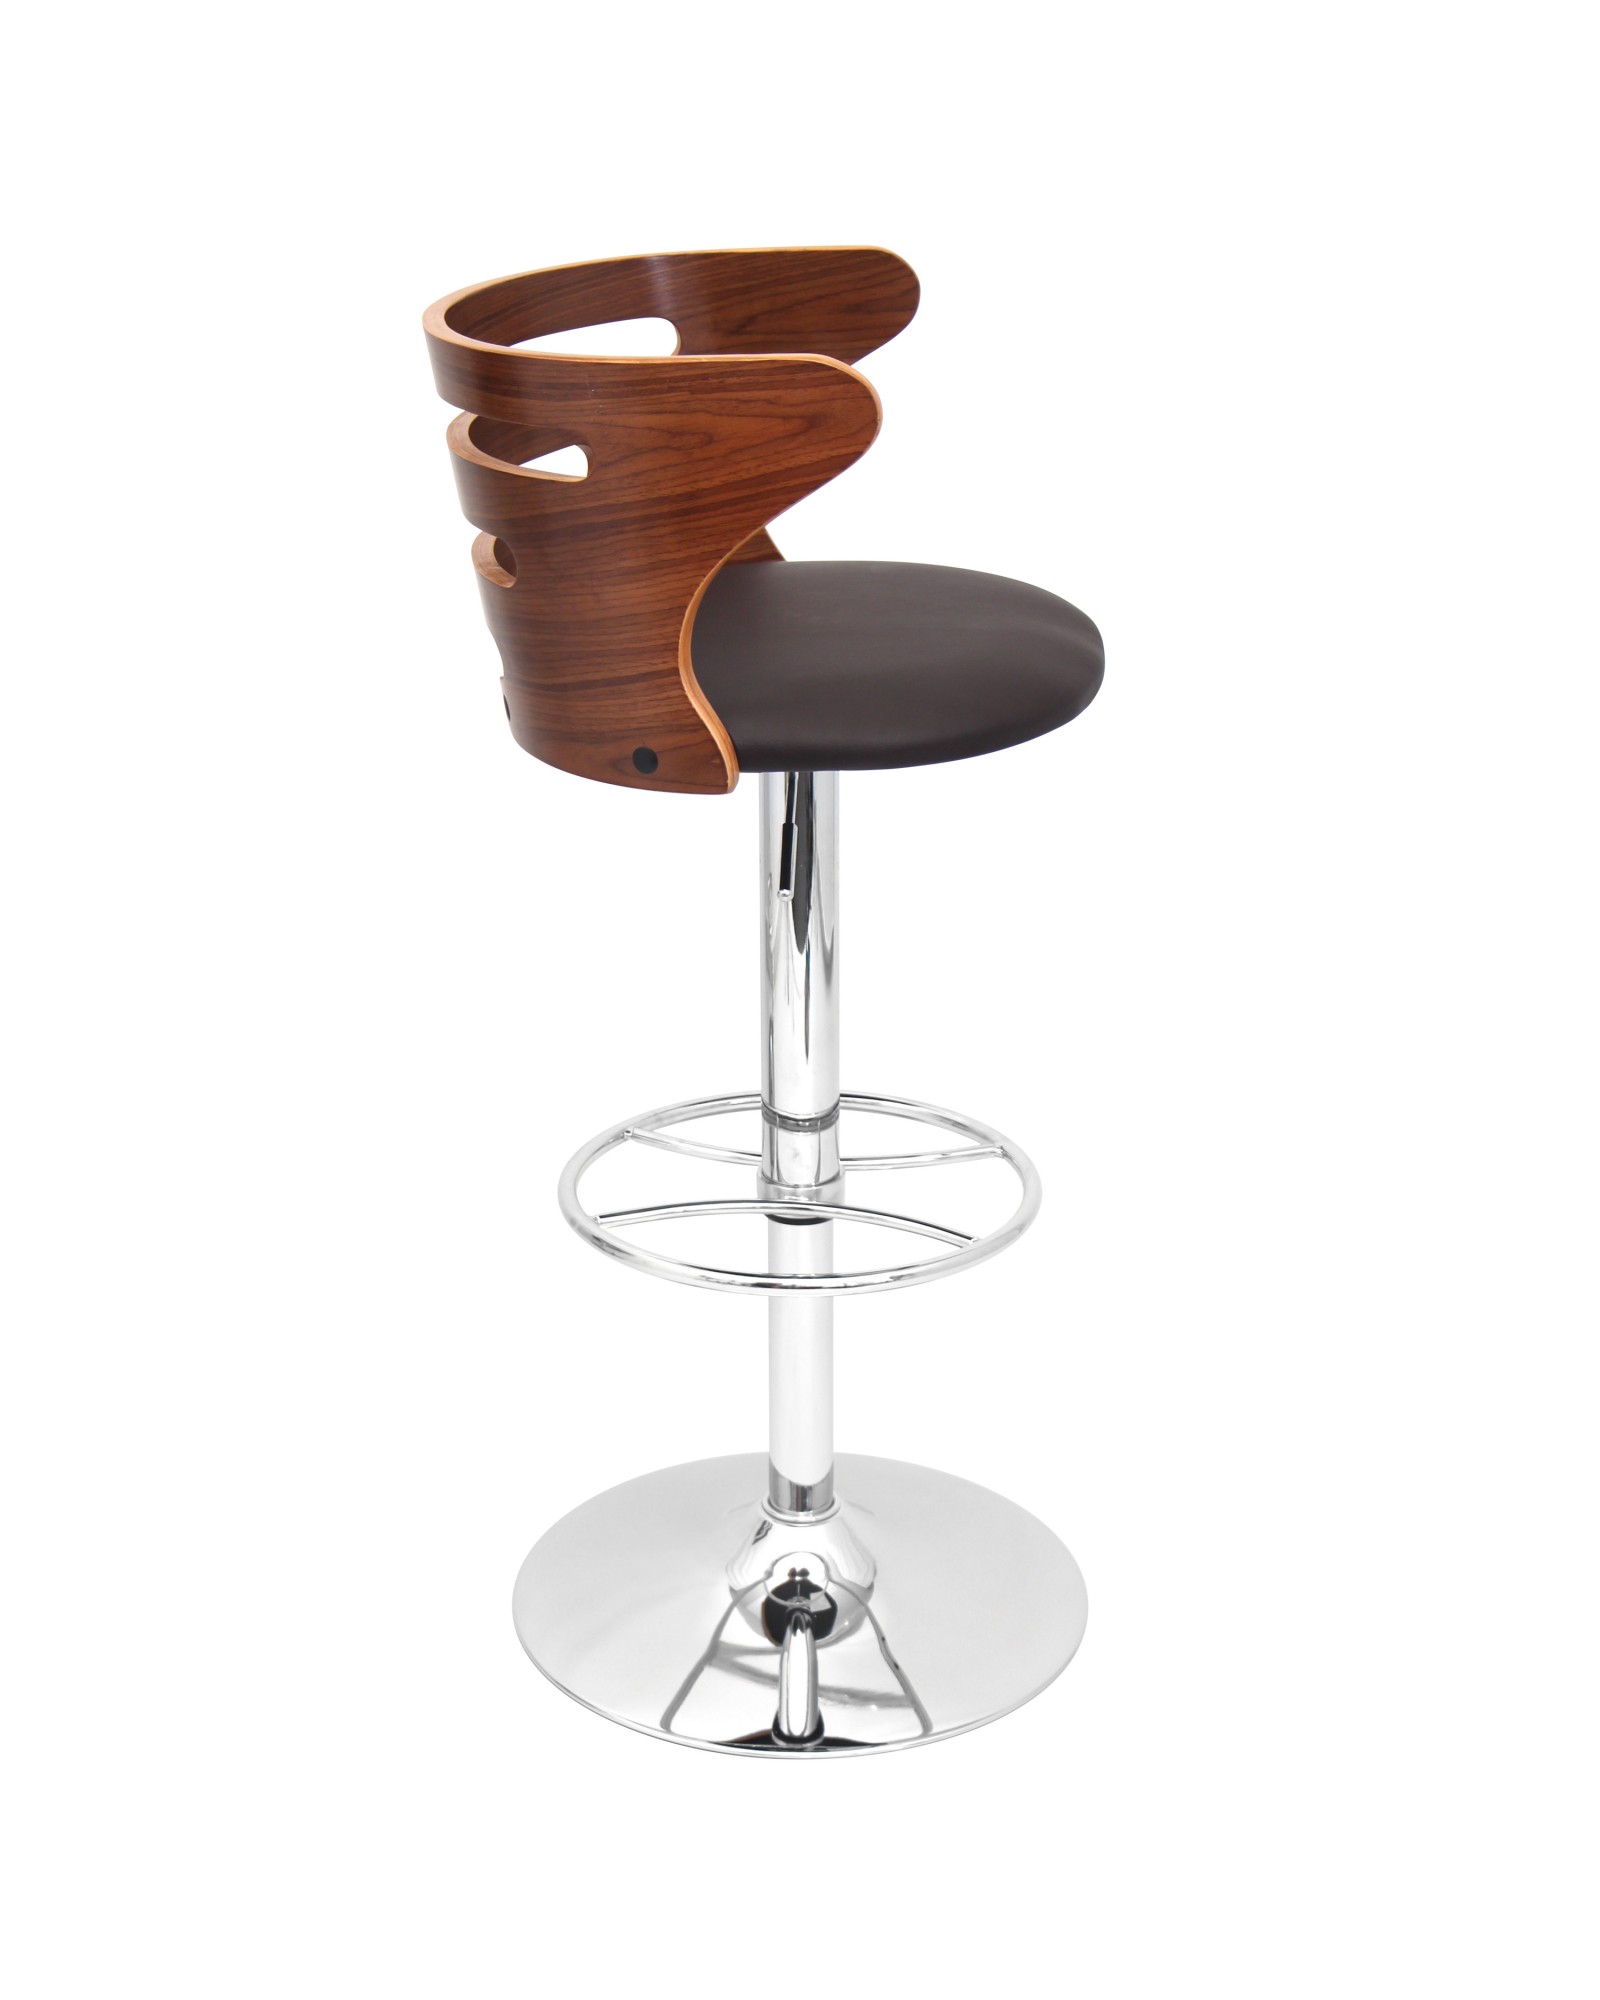 Cosi Mid-Century Modern Adjustable Barstool with Swivel in Walnut and Brown Faux Leather